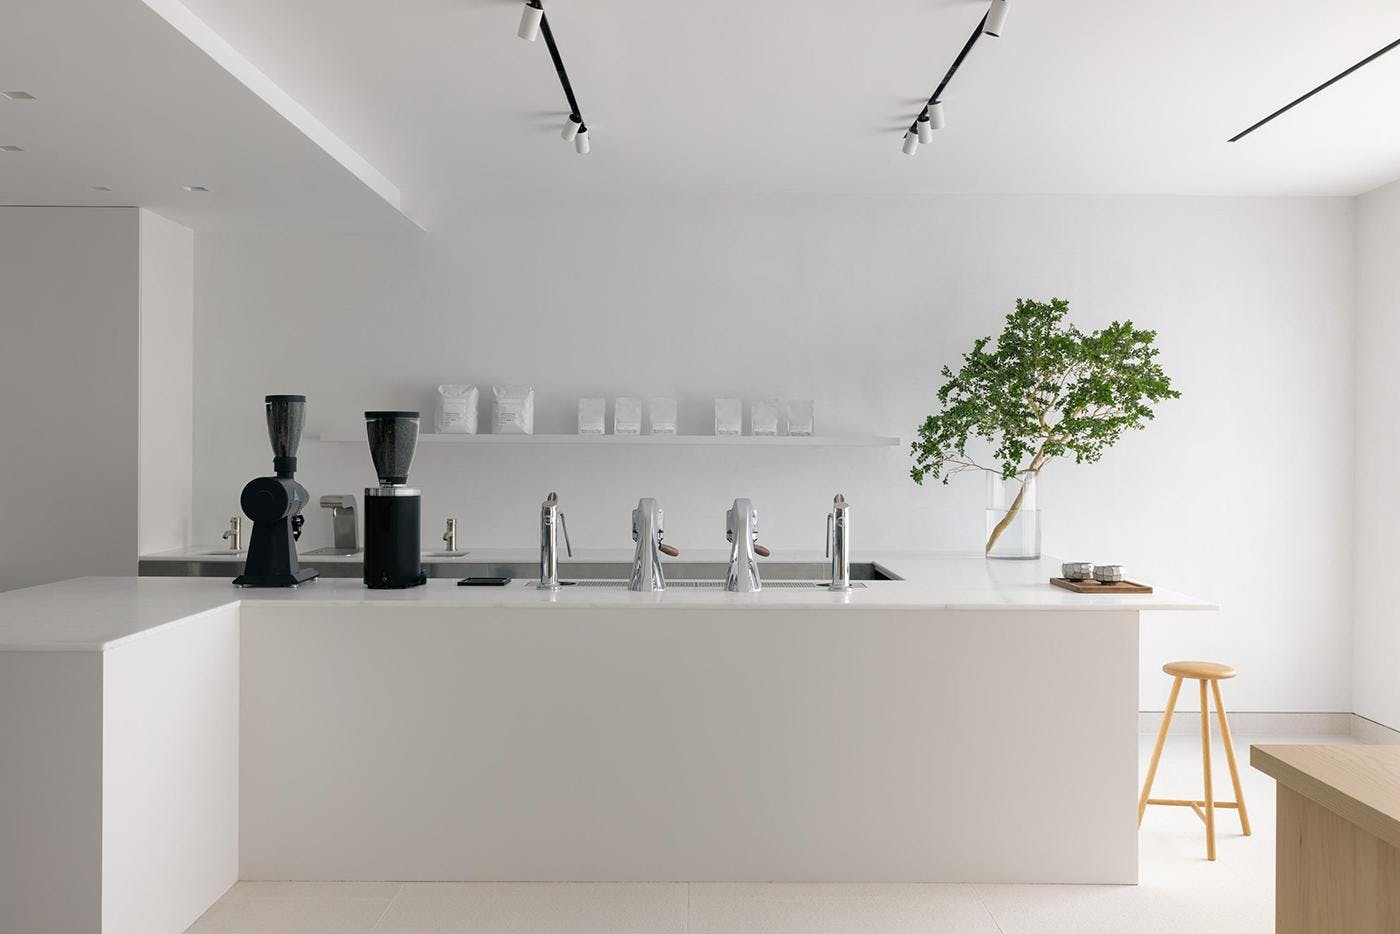 A minimalist design for coffee in the Hamptons